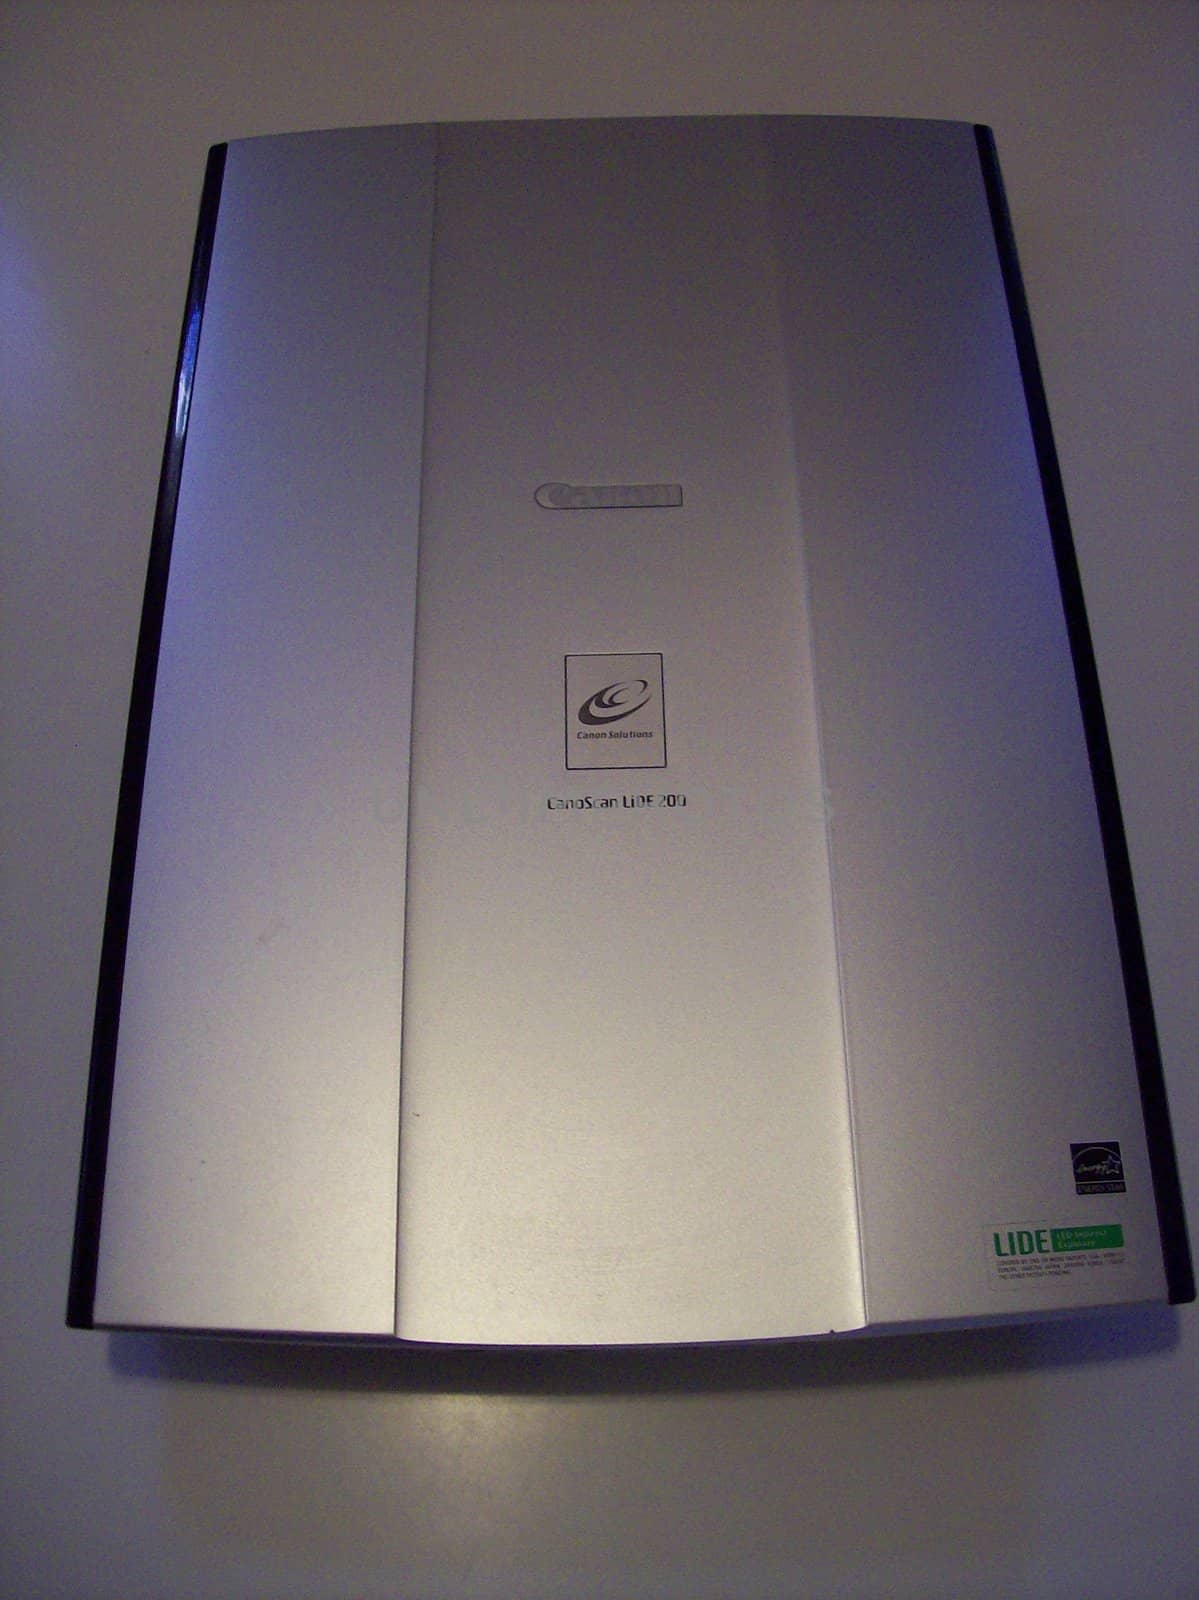 An office scanner on a white background